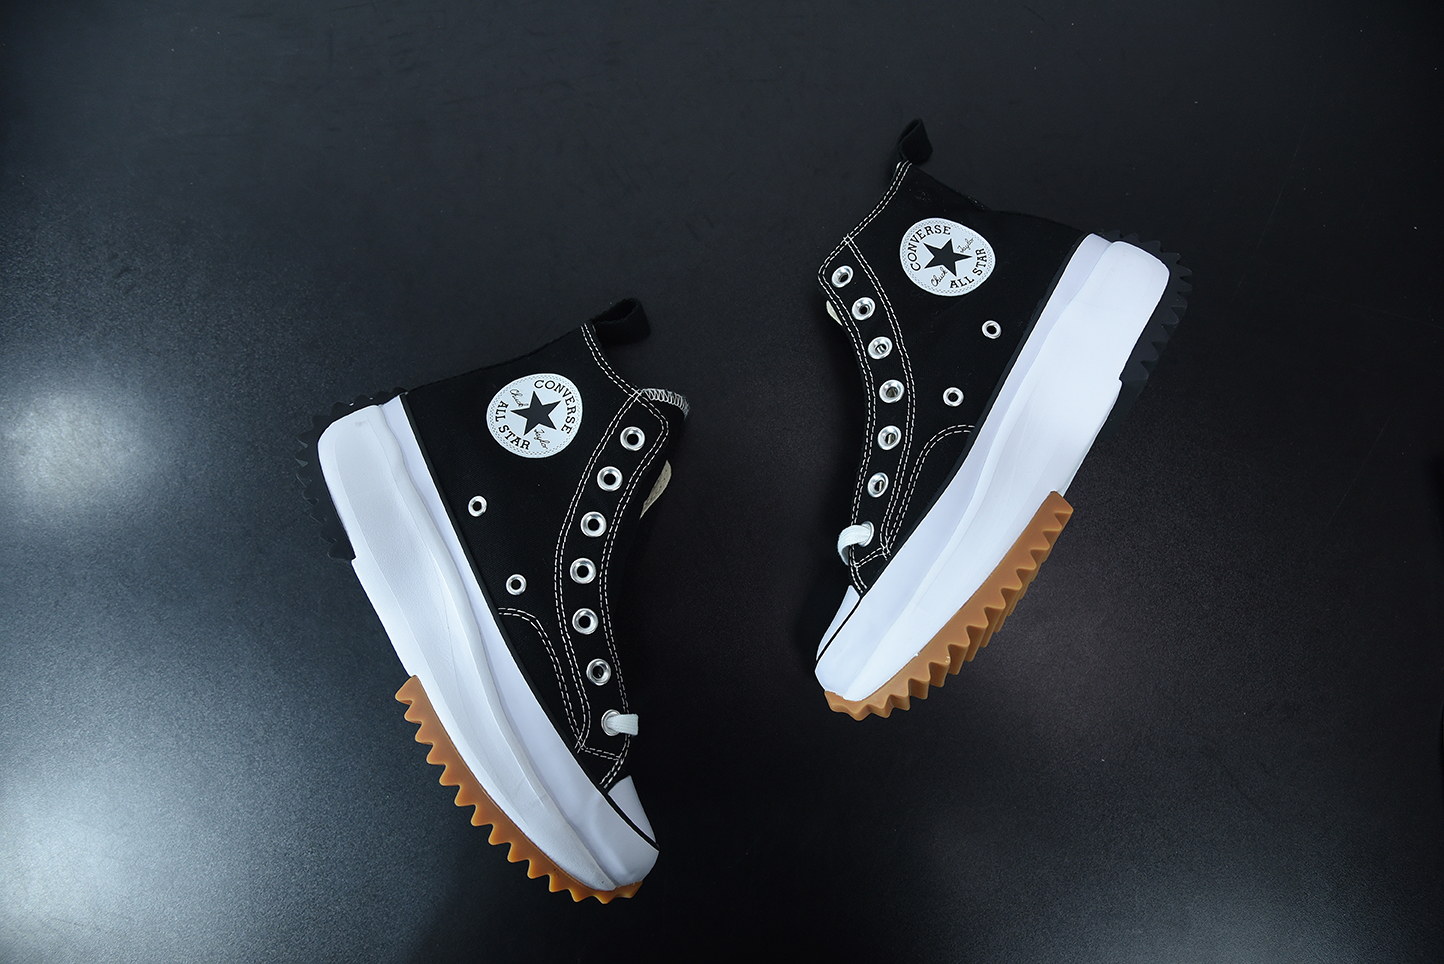 The A COLD WALL x Converse Sponge Crater launches on Thursday